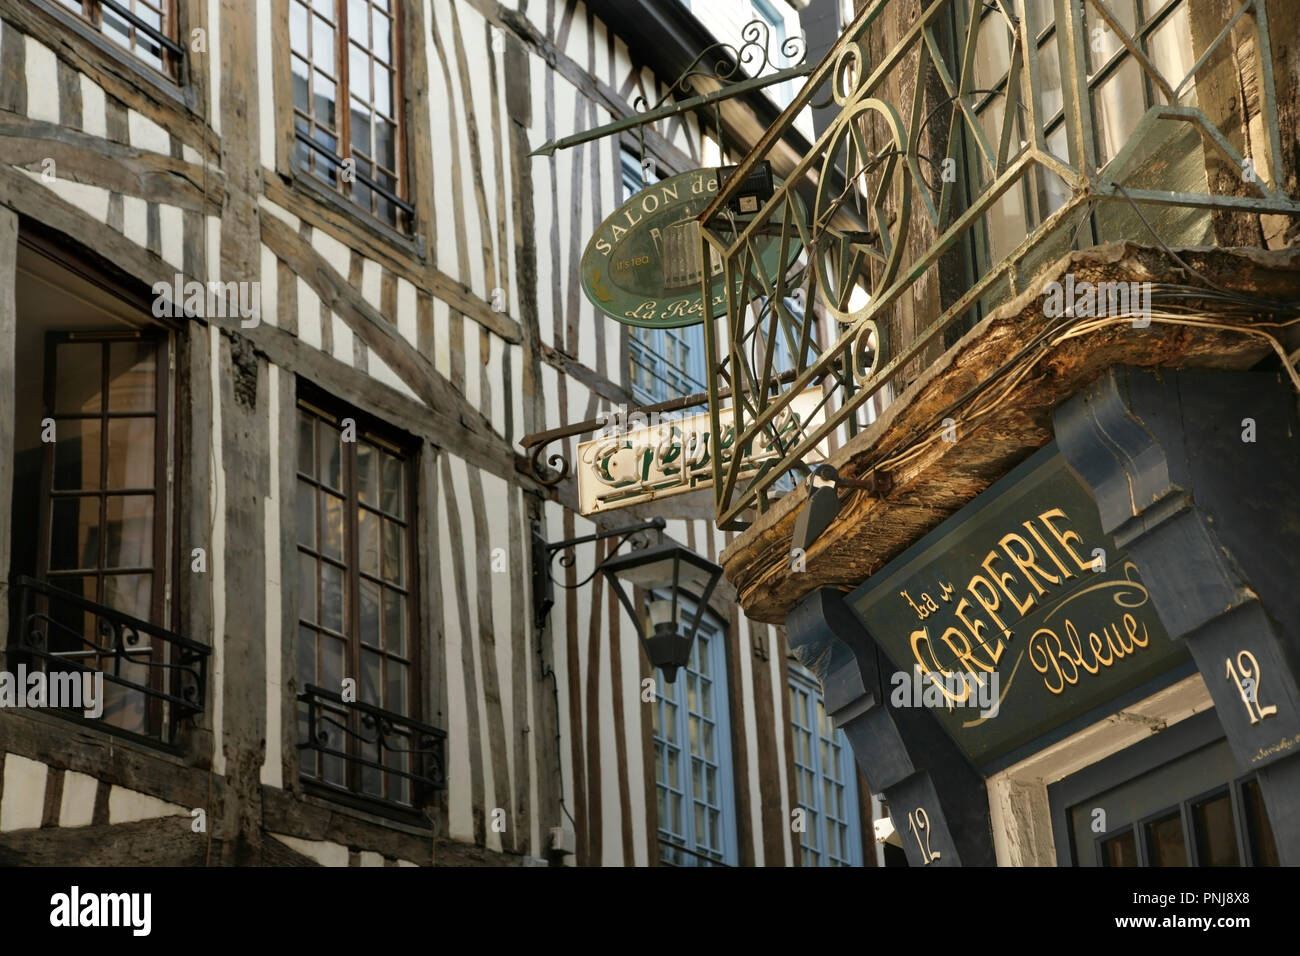 Sign on specialist creperie in old half-timbered building, Rouen, Normandy, France. Stock Photo